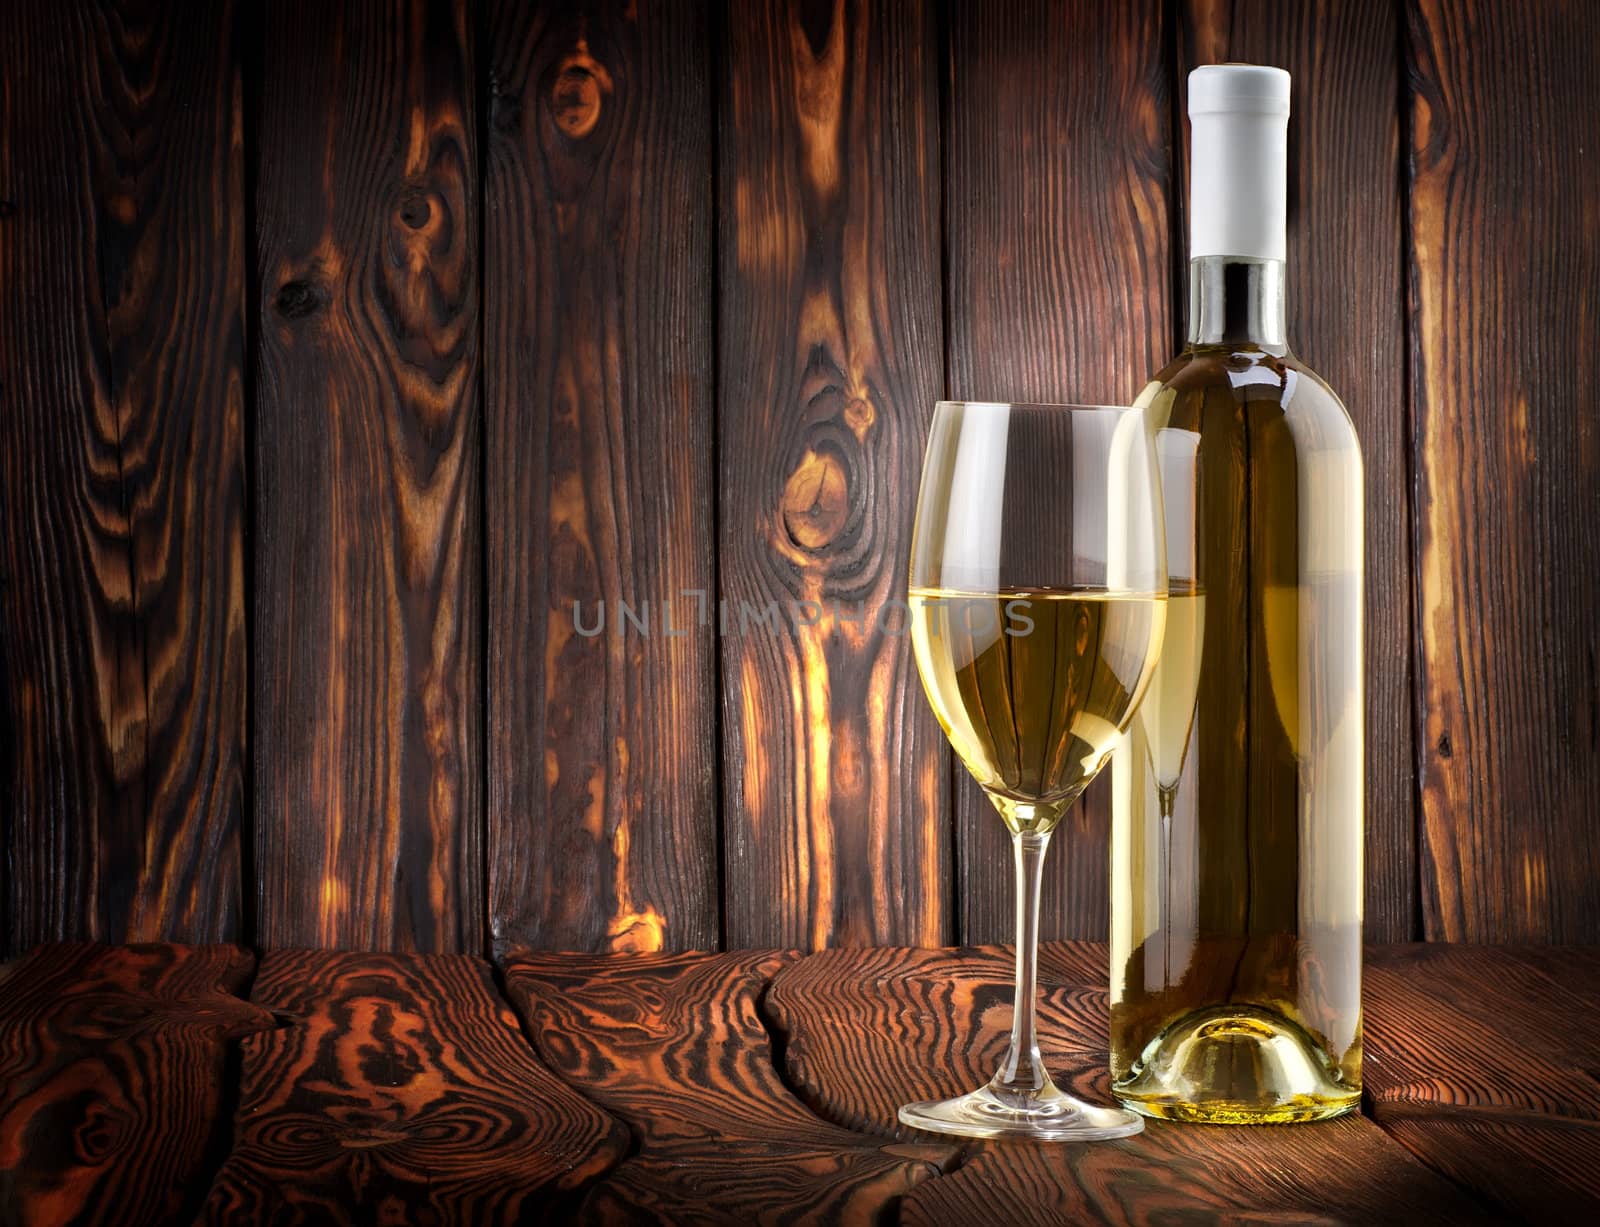 Desser white wine on the table by Givaga